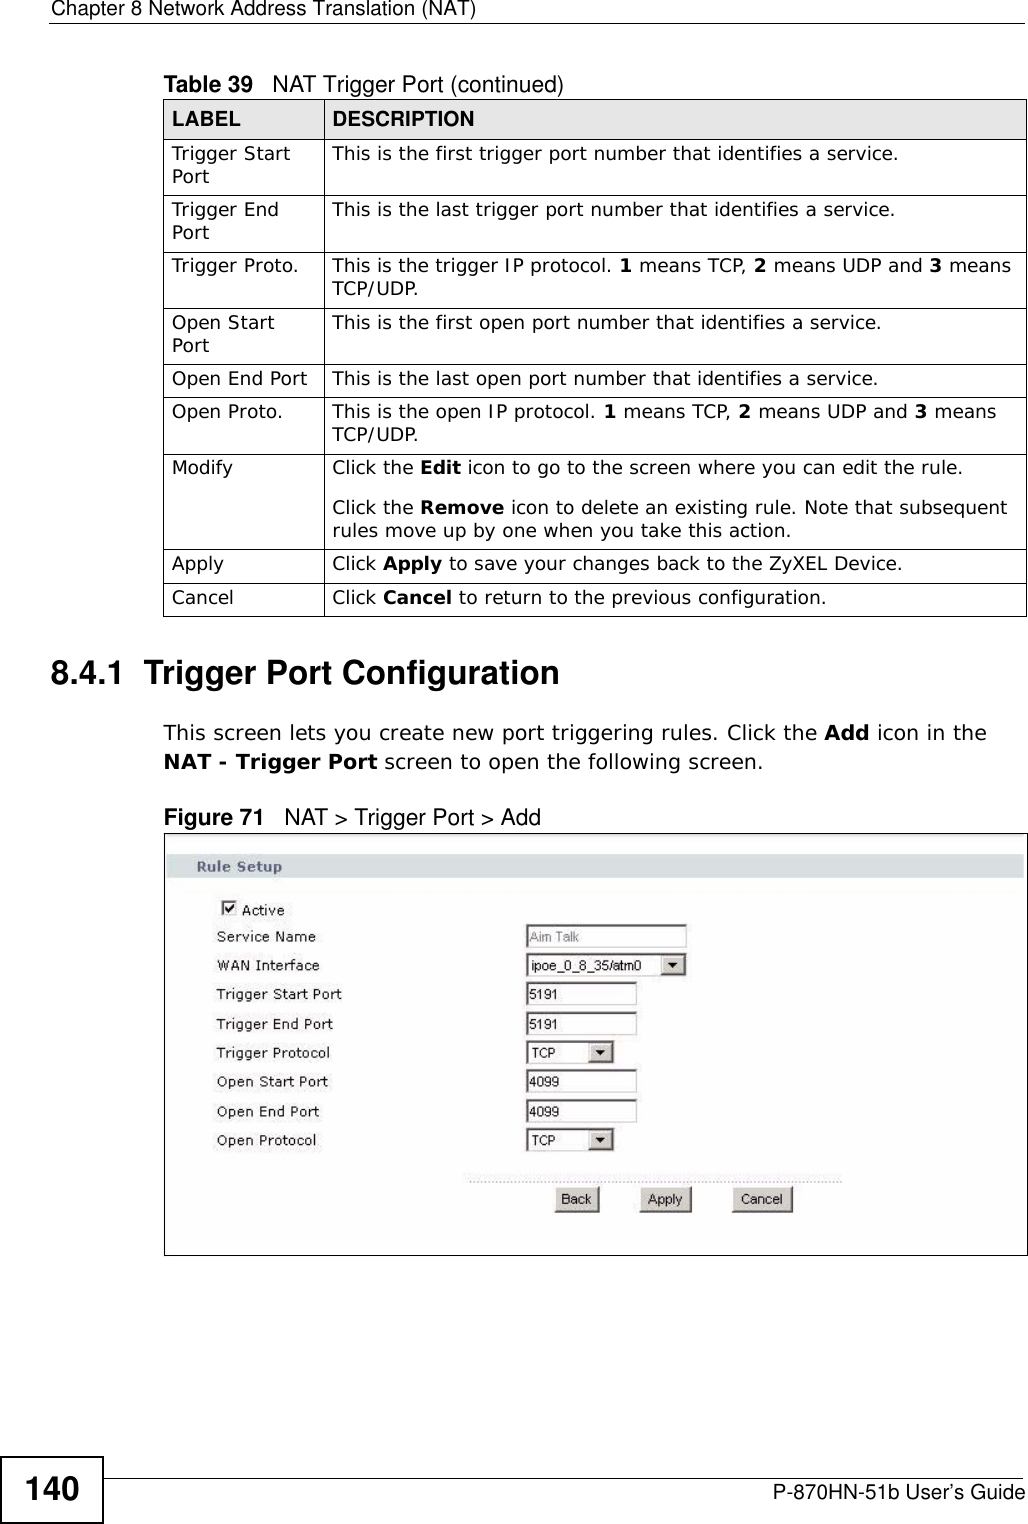 Chapter 8 Network Address Translation (NAT)P-870HN-51b User’s Guide1408.4.1  Trigger Port Configuration This screen lets you create new port triggering rules. Click the Add icon in the NAT - Trigger Port screen to open the following screen.Figure 71   NAT &gt; Trigger Port &gt; Add  Trigger Start Port   This is the first trigger port number that identifies a service.Trigger End Port  This is the last trigger port number that identifies a service.Trigger Proto. This is the trigger IP protocol. 1 means TCP, 2 means UDP and 3 means TCP/UDP.Open Start Port  This is the first open port number that identifies a service.Open End Port  This is the last open port number that identifies a service.Open Proto. This is the open IP protocol. 1 means TCP, 2 means UDP and 3 means TCP/UDP.Modify Click the Edit icon to go to the screen where you can edit the rule.Click the Remove icon to delete an existing rule. Note that subsequent rules move up by one when you take this action.Apply Click Apply to save your changes back to the ZyXEL Device.Cancel Click Cancel to return to the previous configuration.Table 39   NAT Trigger Port (continued)LABEL DESCRIPTION